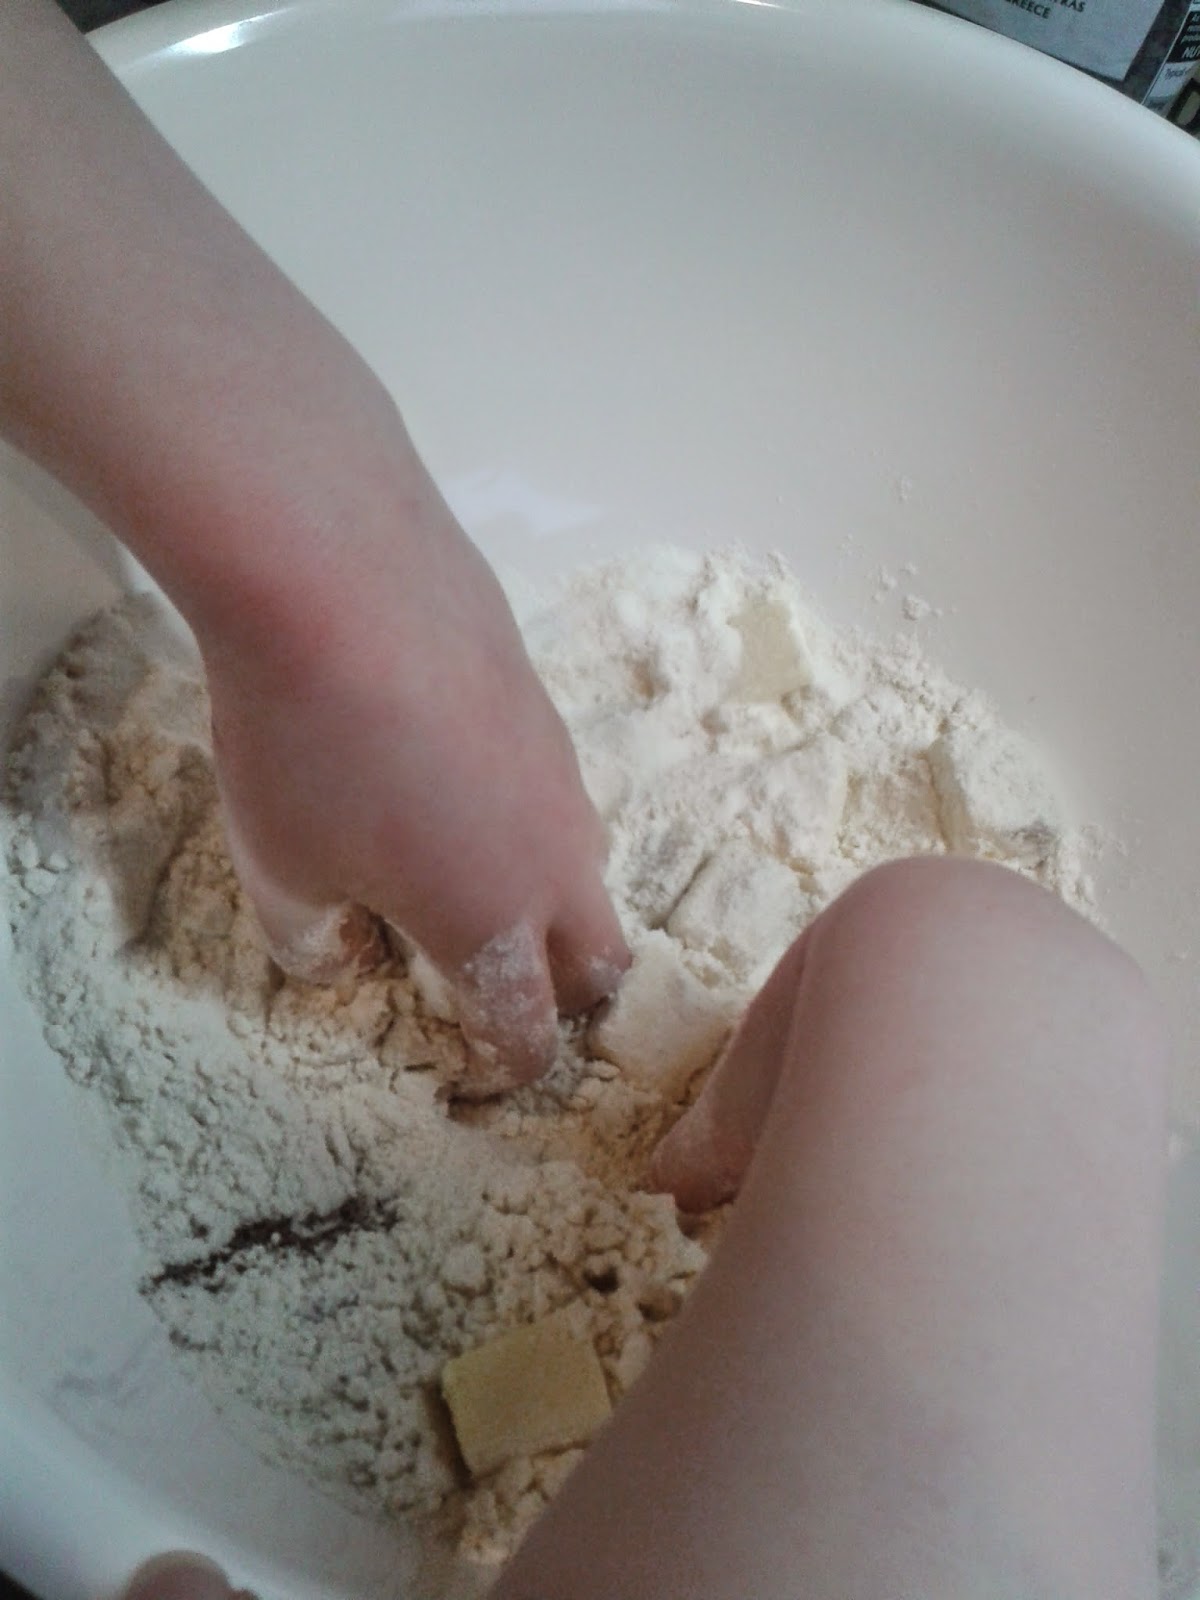 Welsh cakes recipe - Caitlin mixing the Welsh cakes ingredients